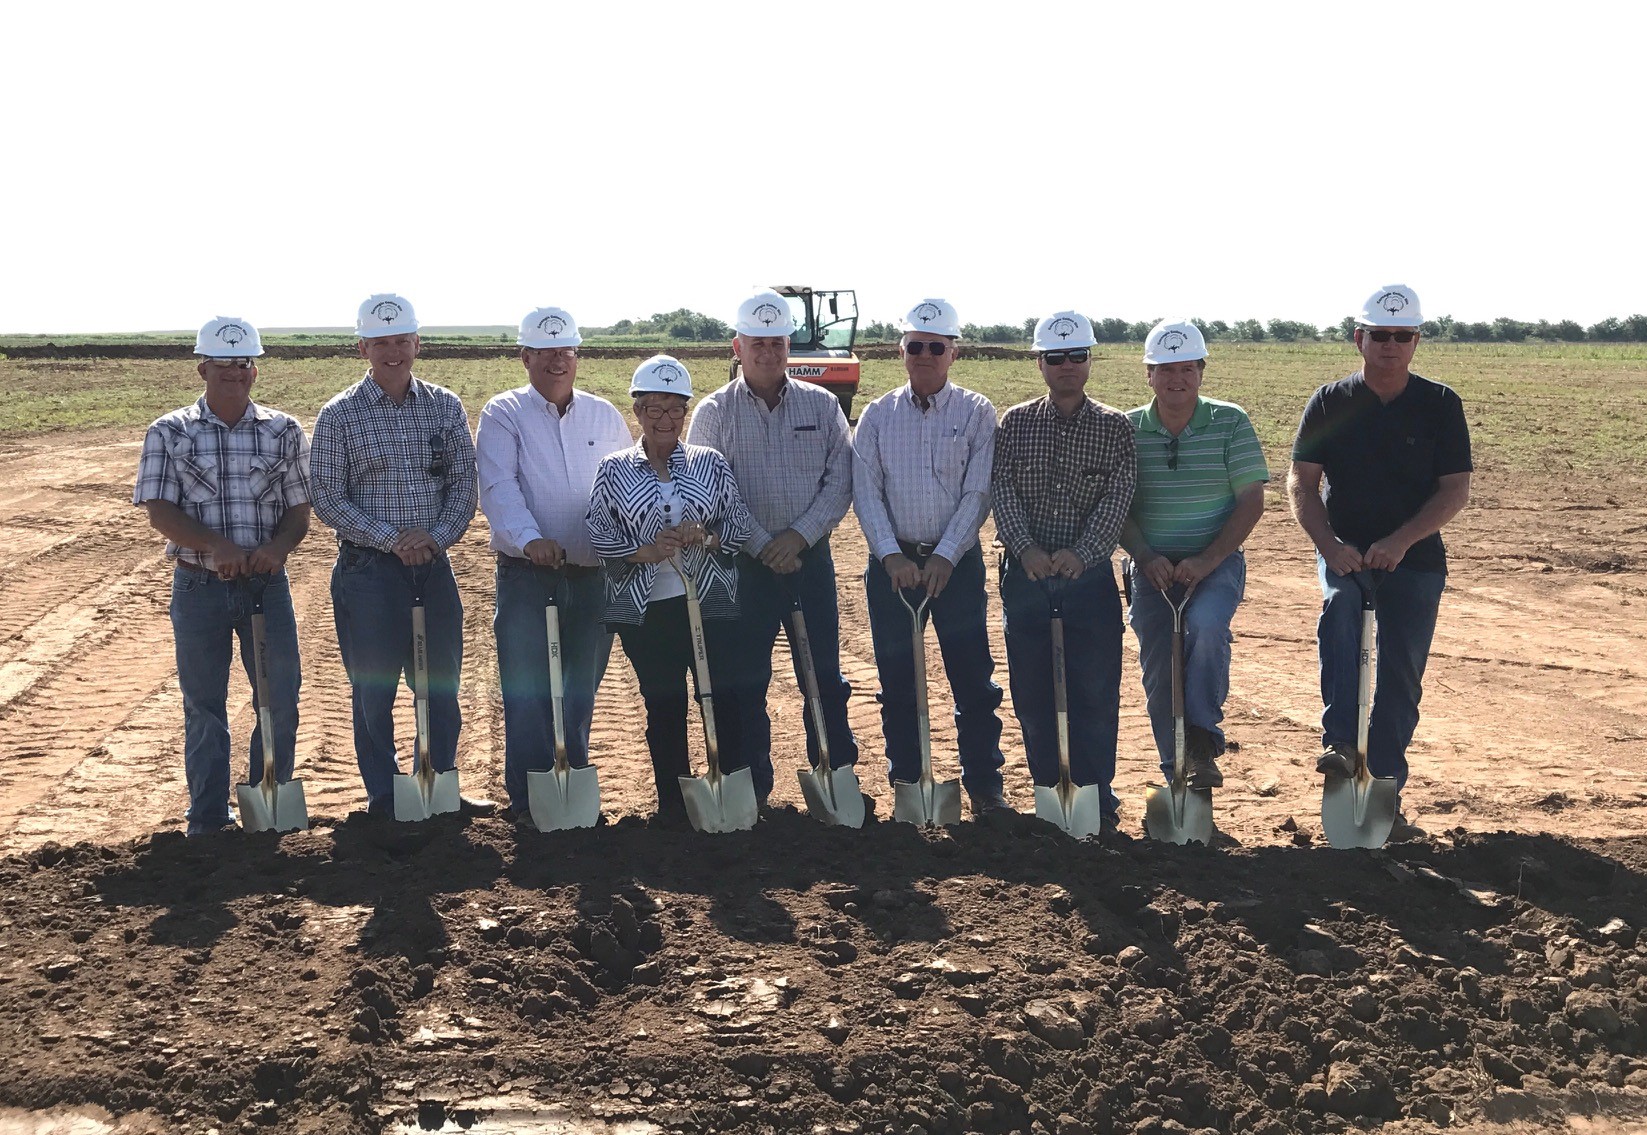 Carnegie Co-op Breaks Ground on State-of-the-Art Cotton Gin Facility Amid Cotton�s Rise in Oklahoma